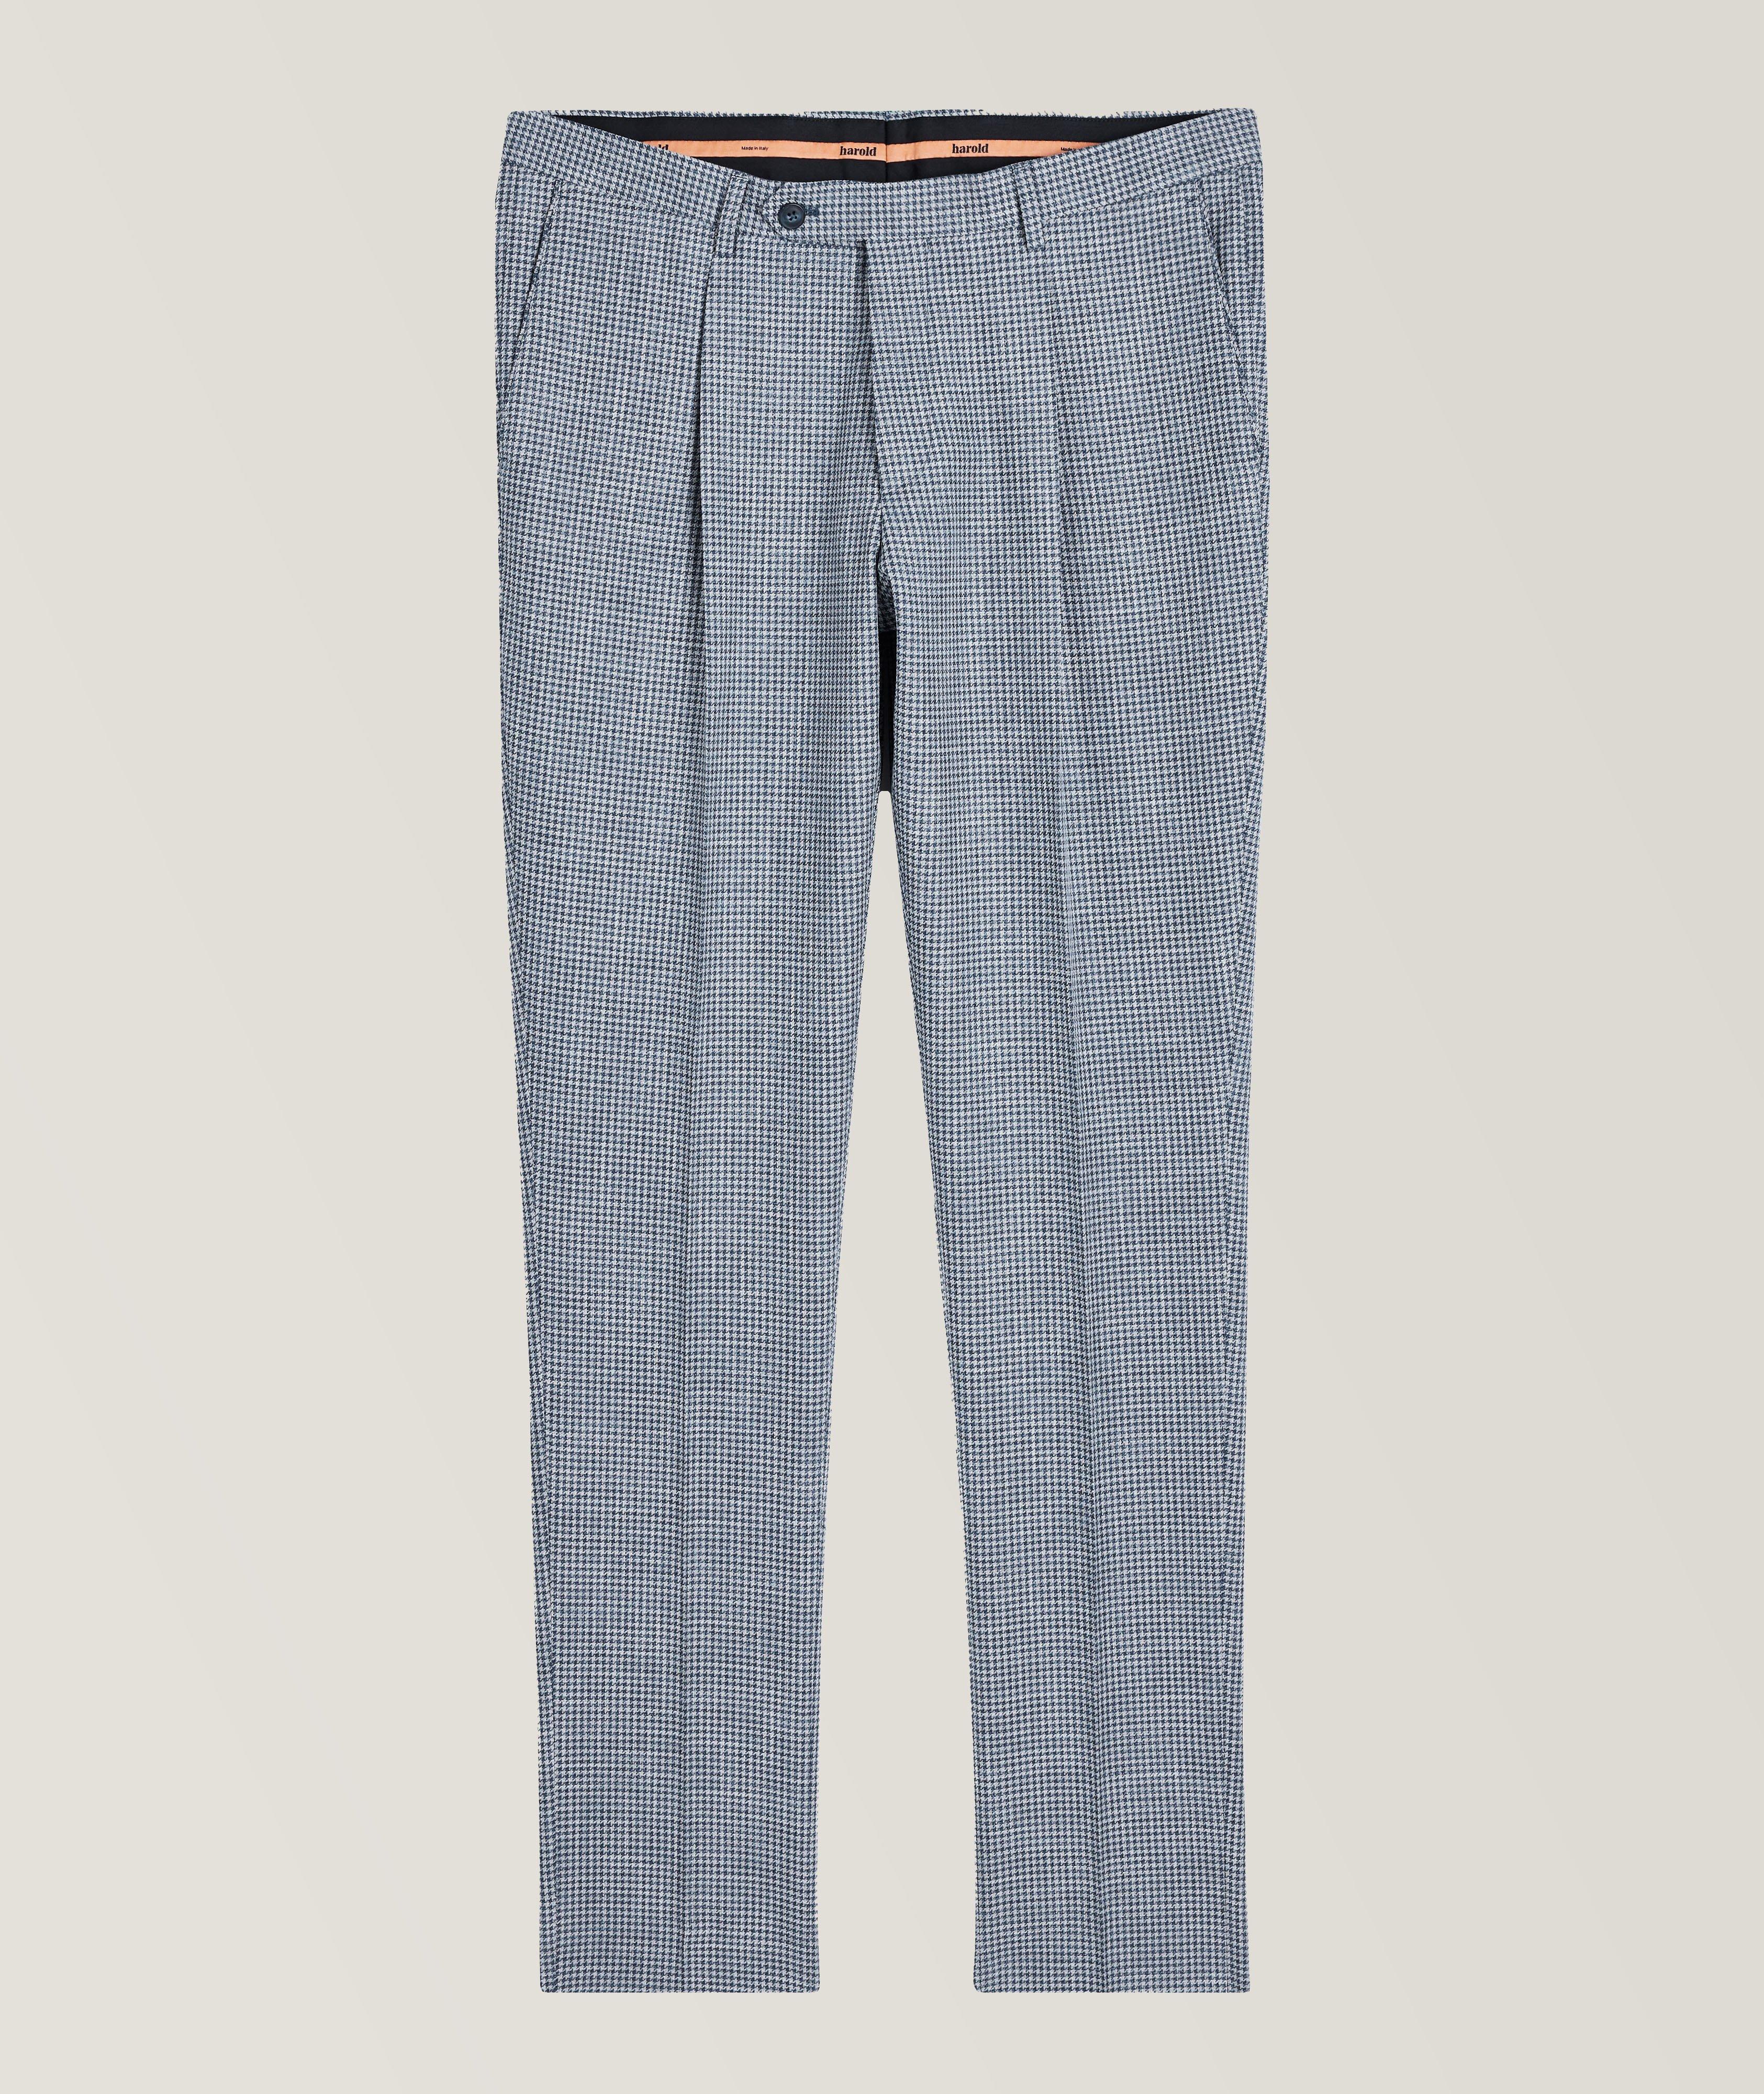 Microhoundstooth Cotton-Virgin Wool Pants